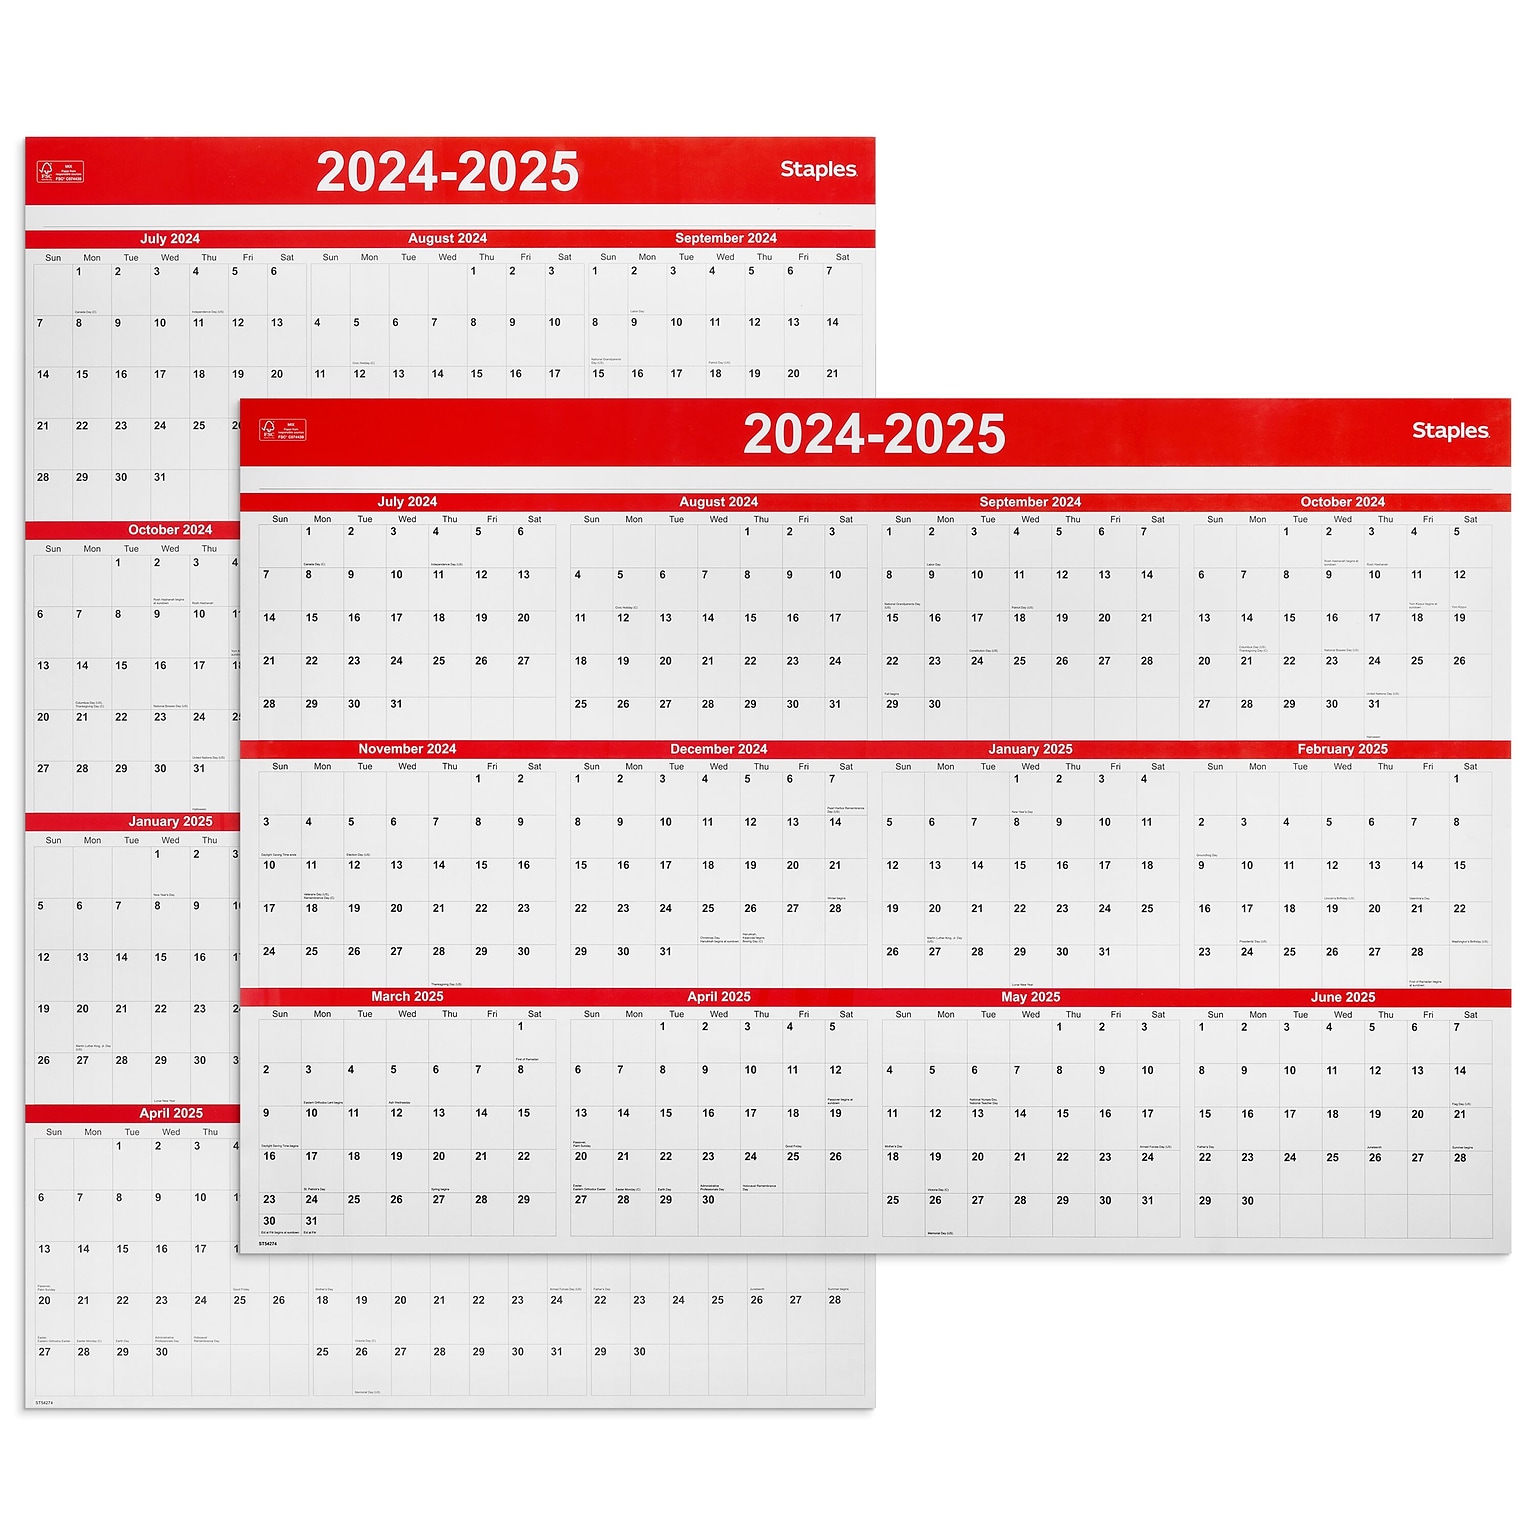 2024-2025 Staples 32 x 48 Academic Yearly Dry-Erase Wall Calendar, Red/White (ST54274-23)